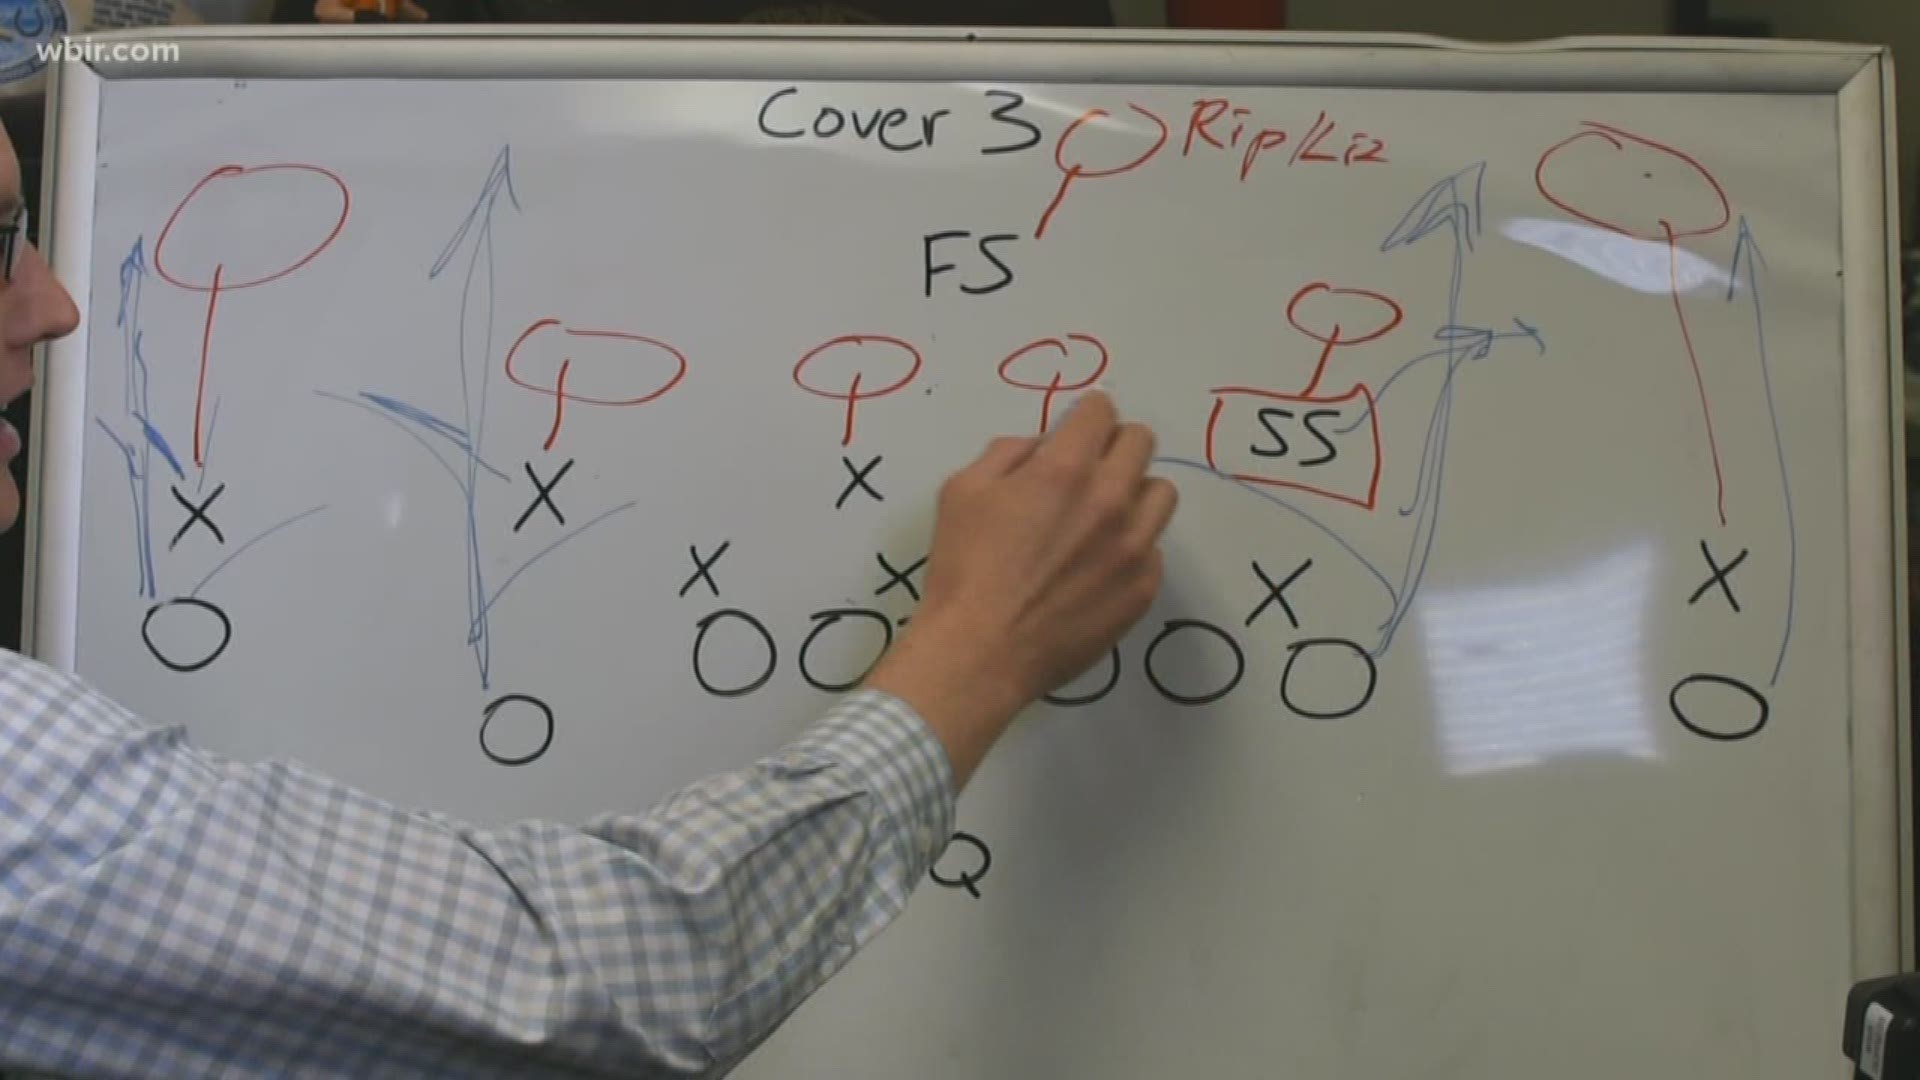 WBIR 10Sports Anchor Patrick Murray explains a hybrid pattern matching coverage from Jeremy Pruitt's playbook, Cover 3 Rip/Liz.